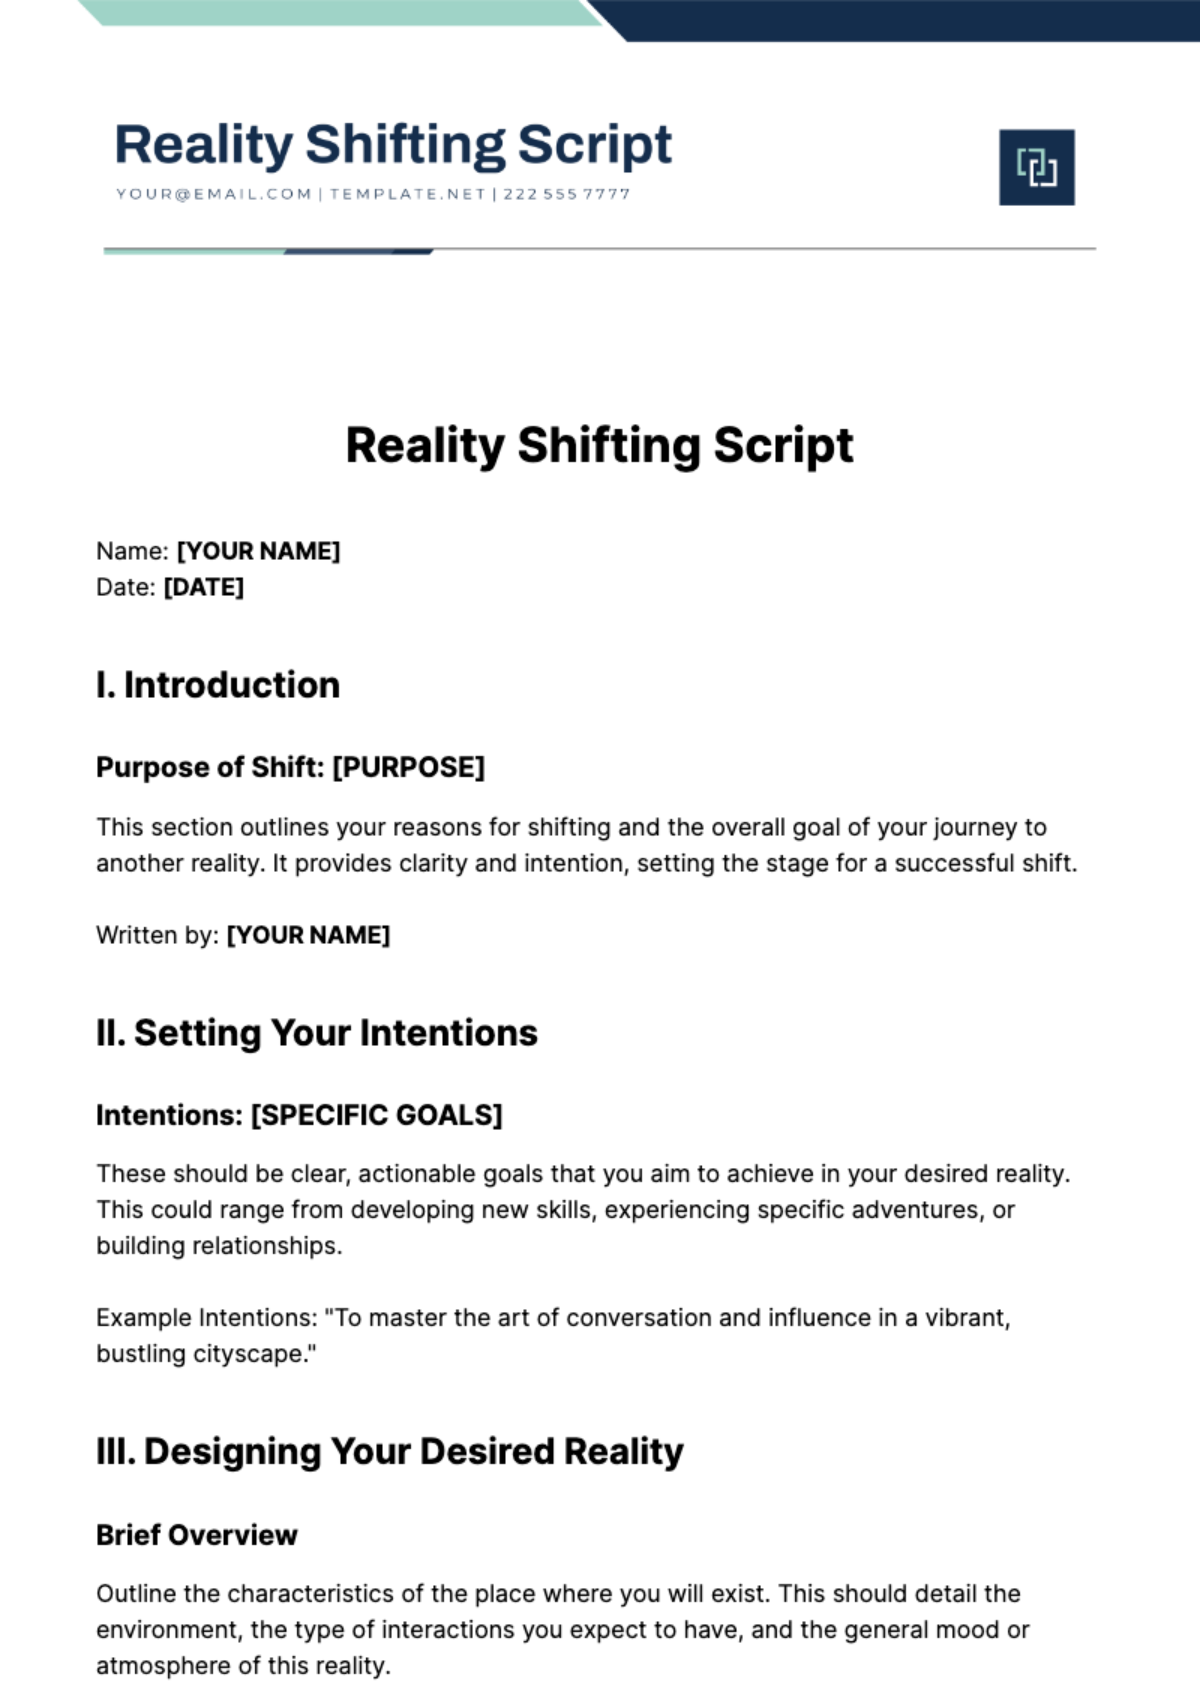 Reality Shifting Script Template